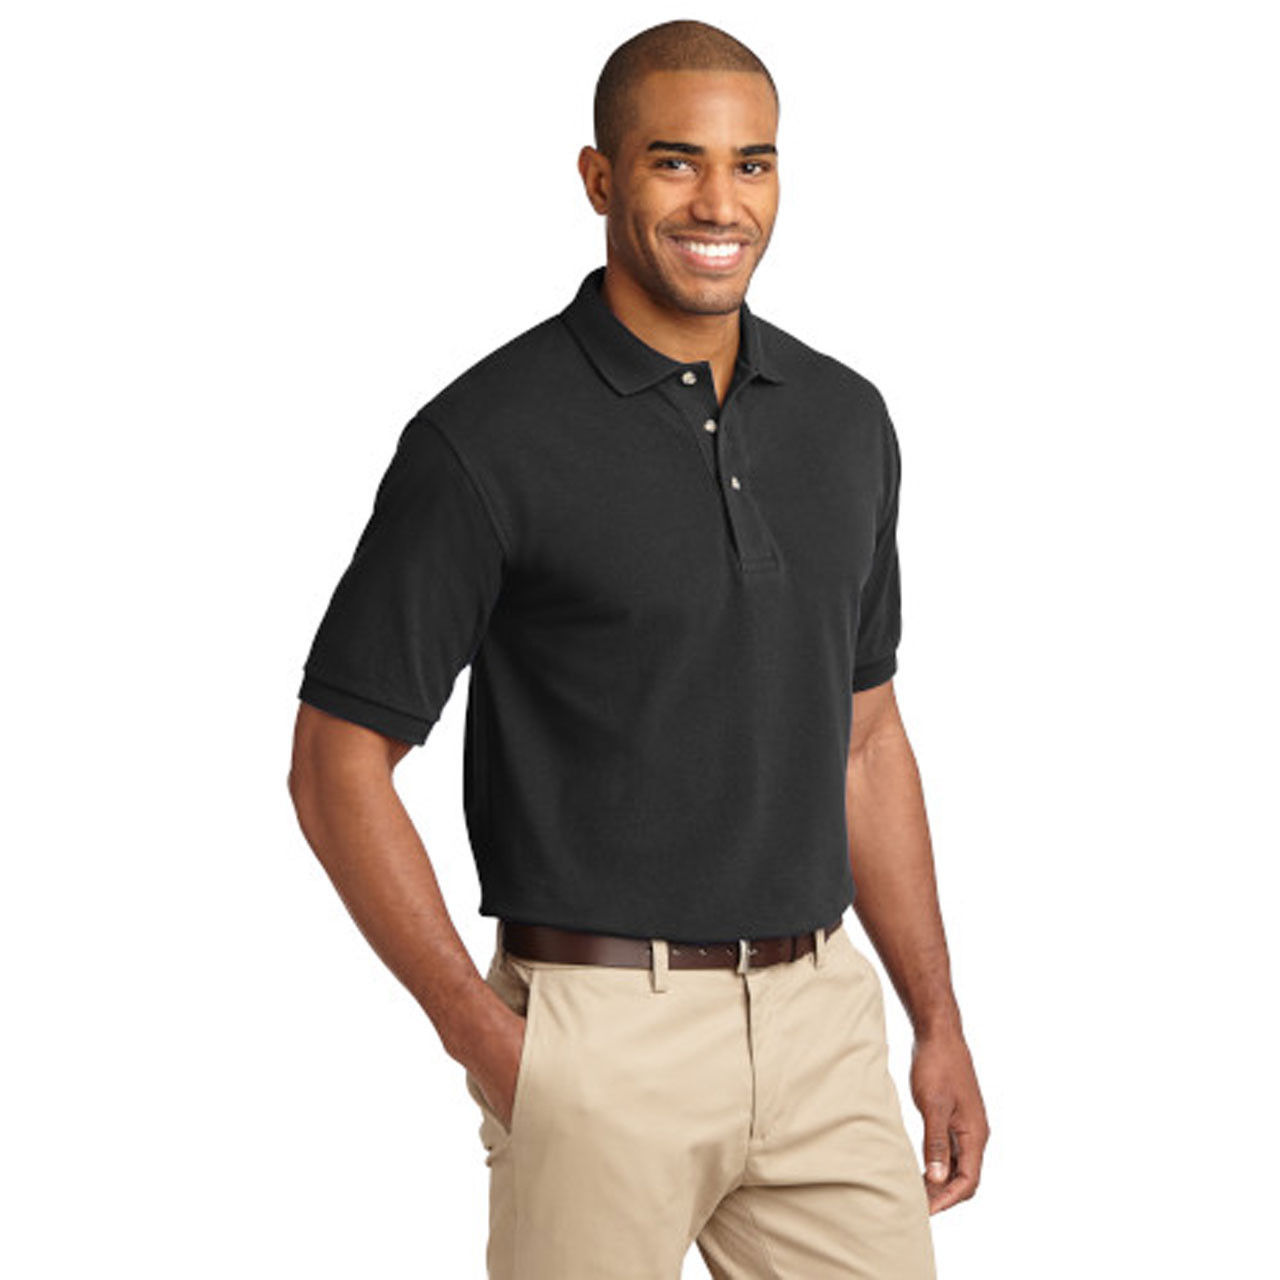 What unique features are in the 100 cotton polo shirts wholesale, specifically the Black K420?